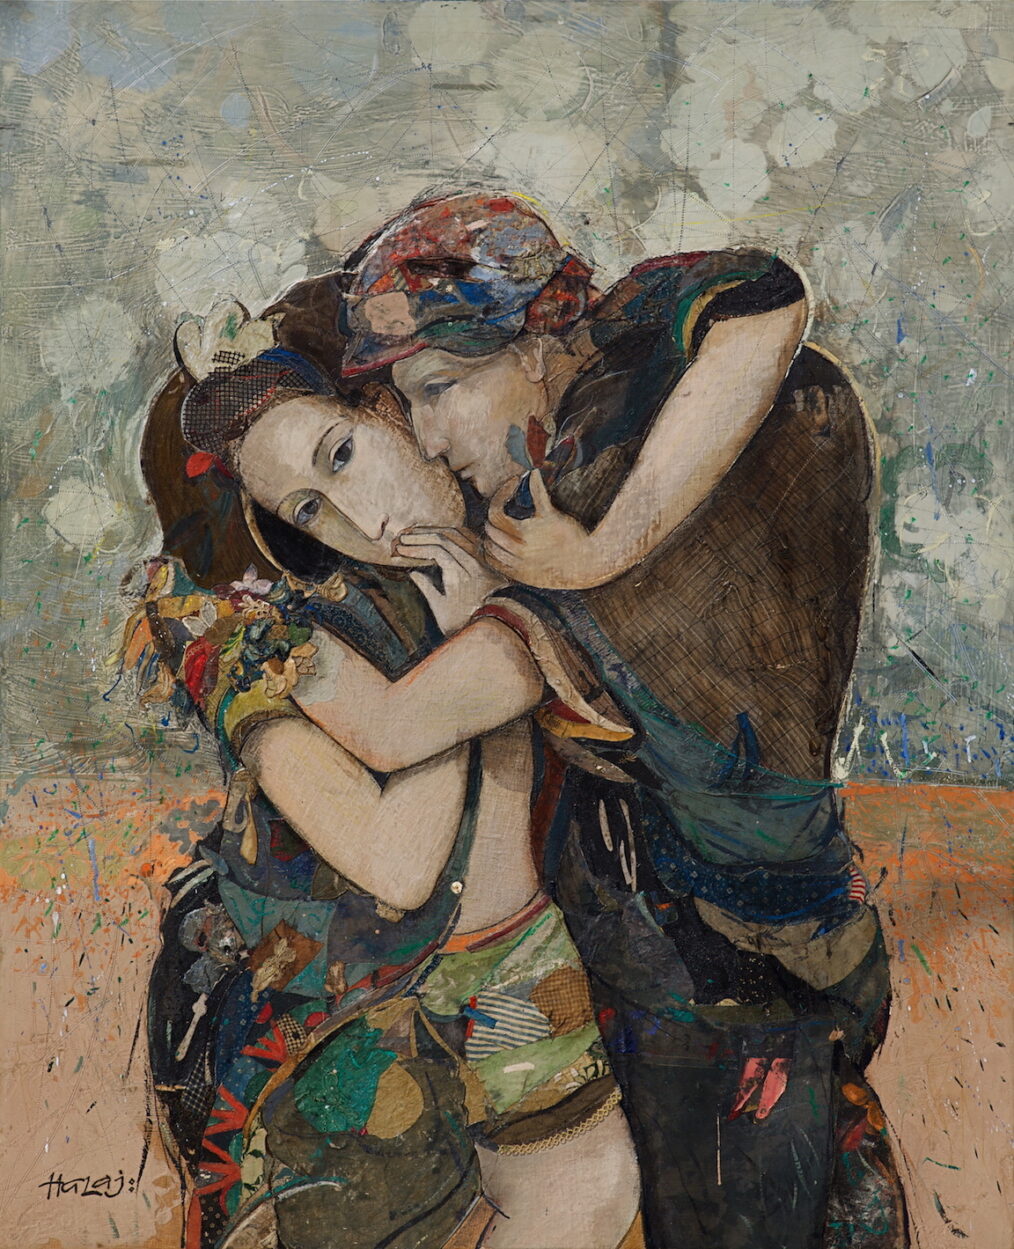 "Lovers" 2014 Oil, encaustic wax, emulsion, textile, mixed media on panel, 44x36 in. (111.8x91.4 cm)